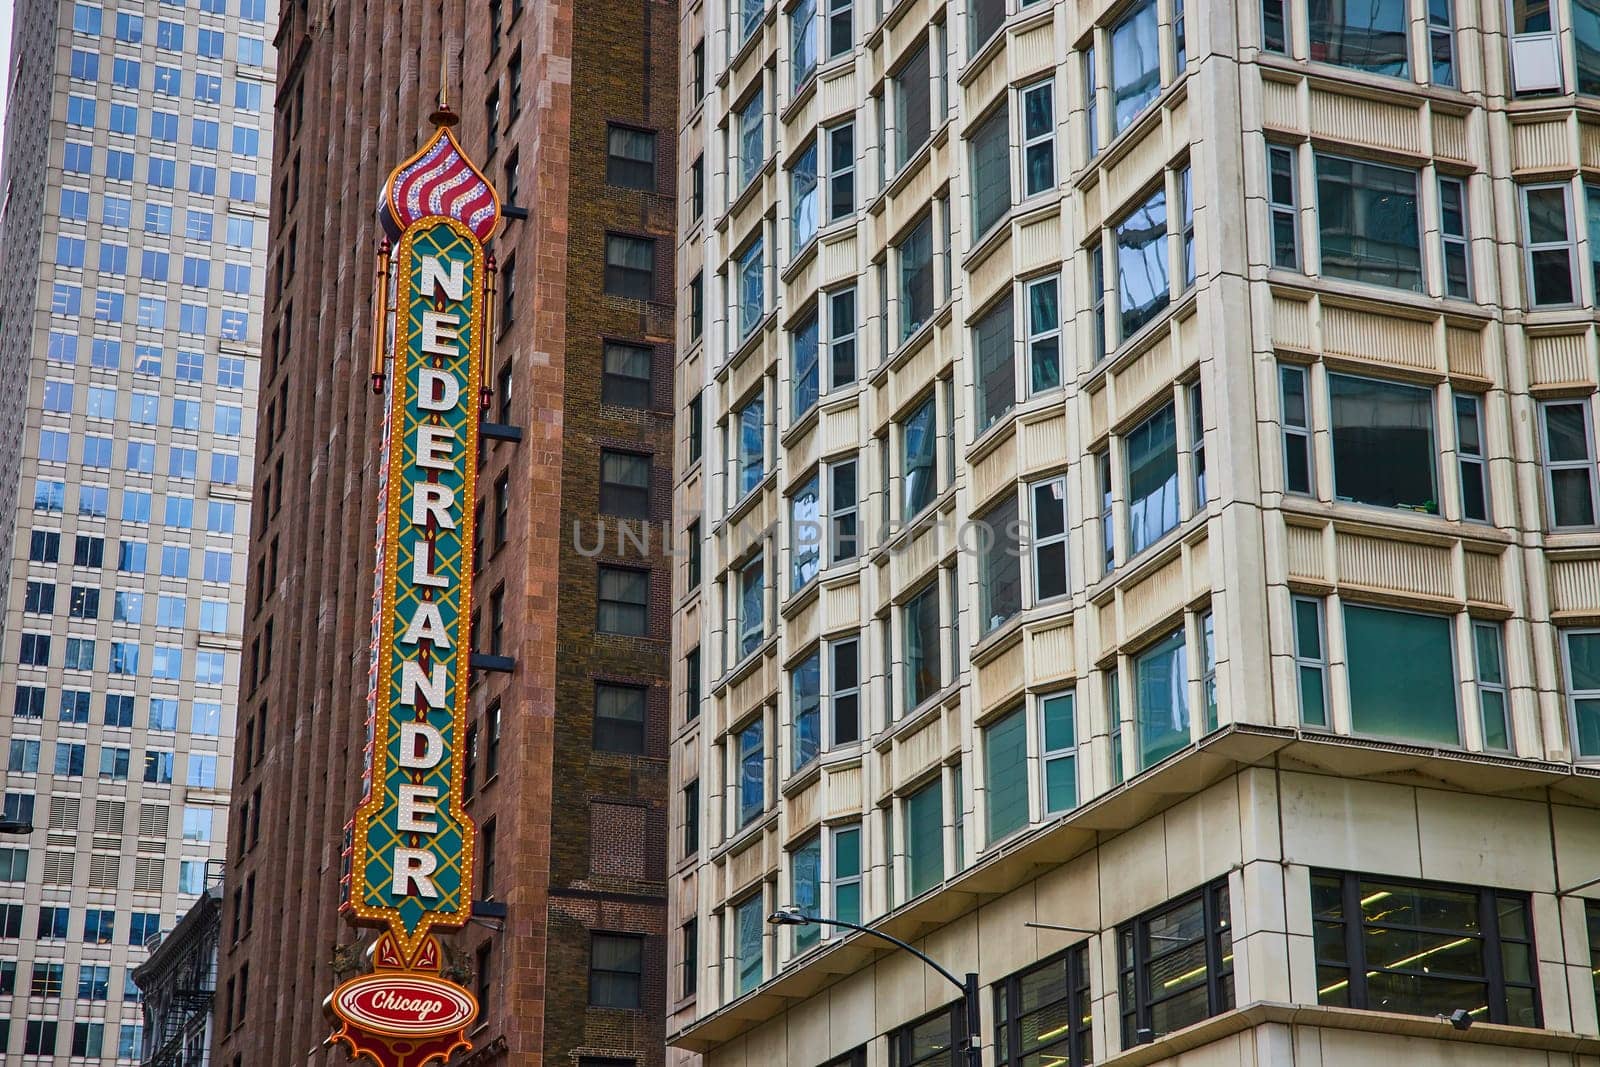 Image of Nederlander sign on side of skyscraper building on gloomy day, Chicago Illinois, USA